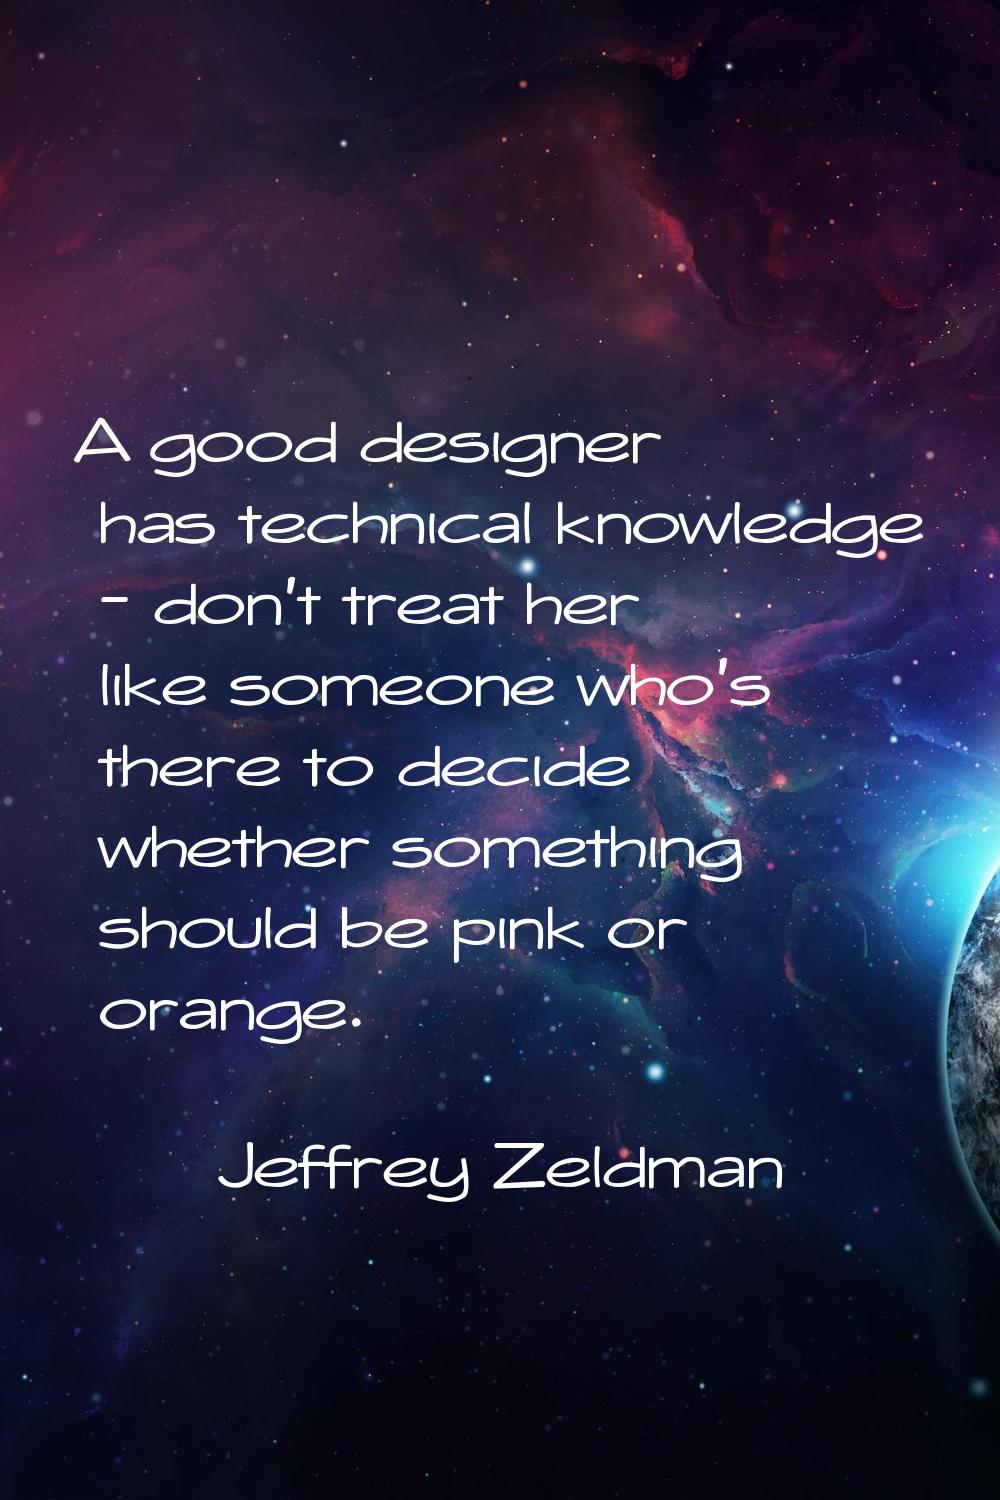 A good designer has technical knowledge - don't treat her like someone who's there to decide whethe